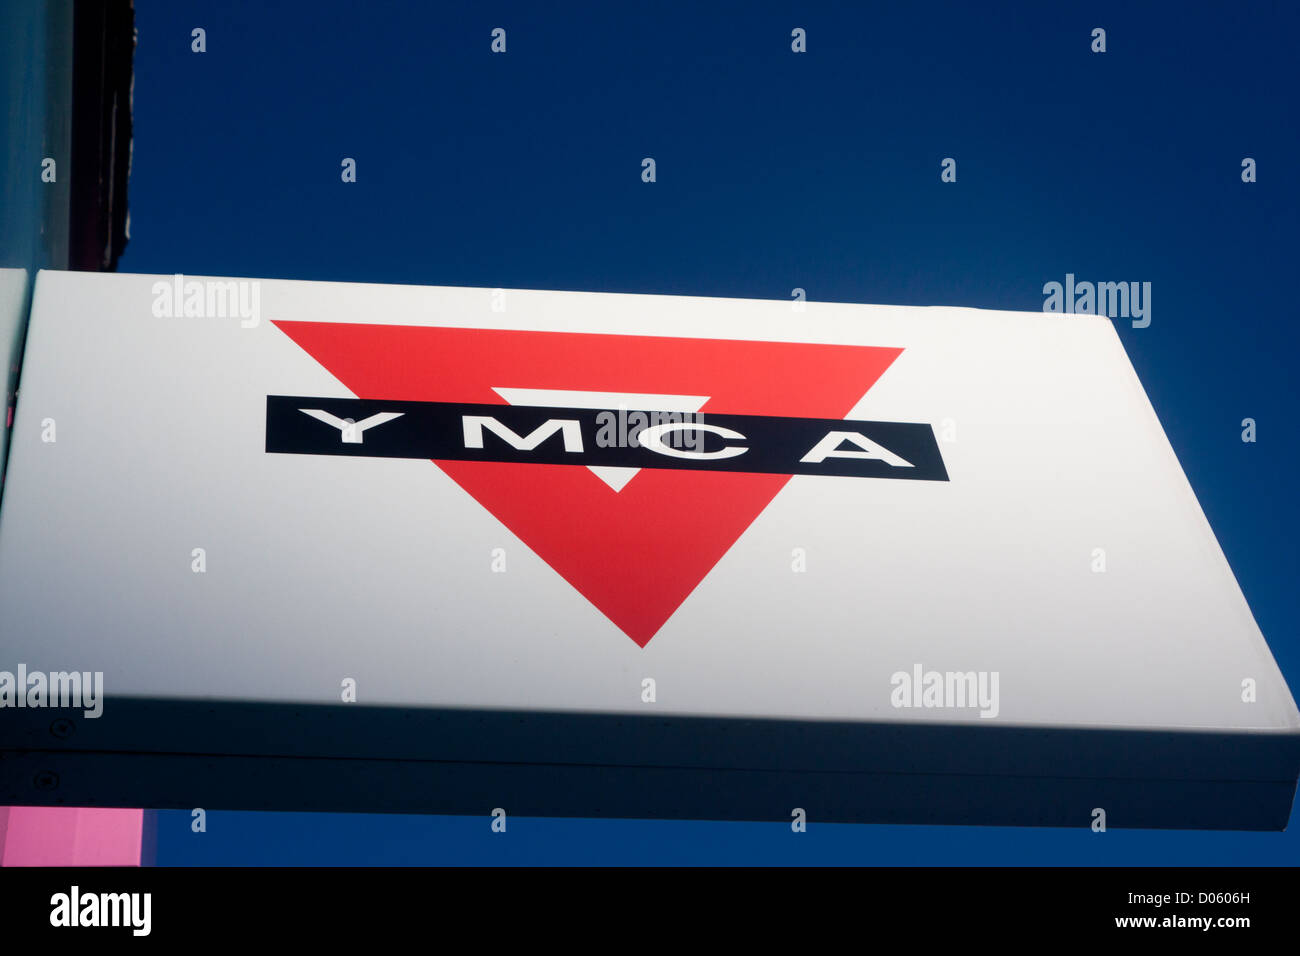 YMCA charity shop sign with distinctive red triangle on blue sky background Cardiff Wales UK Stock Photo